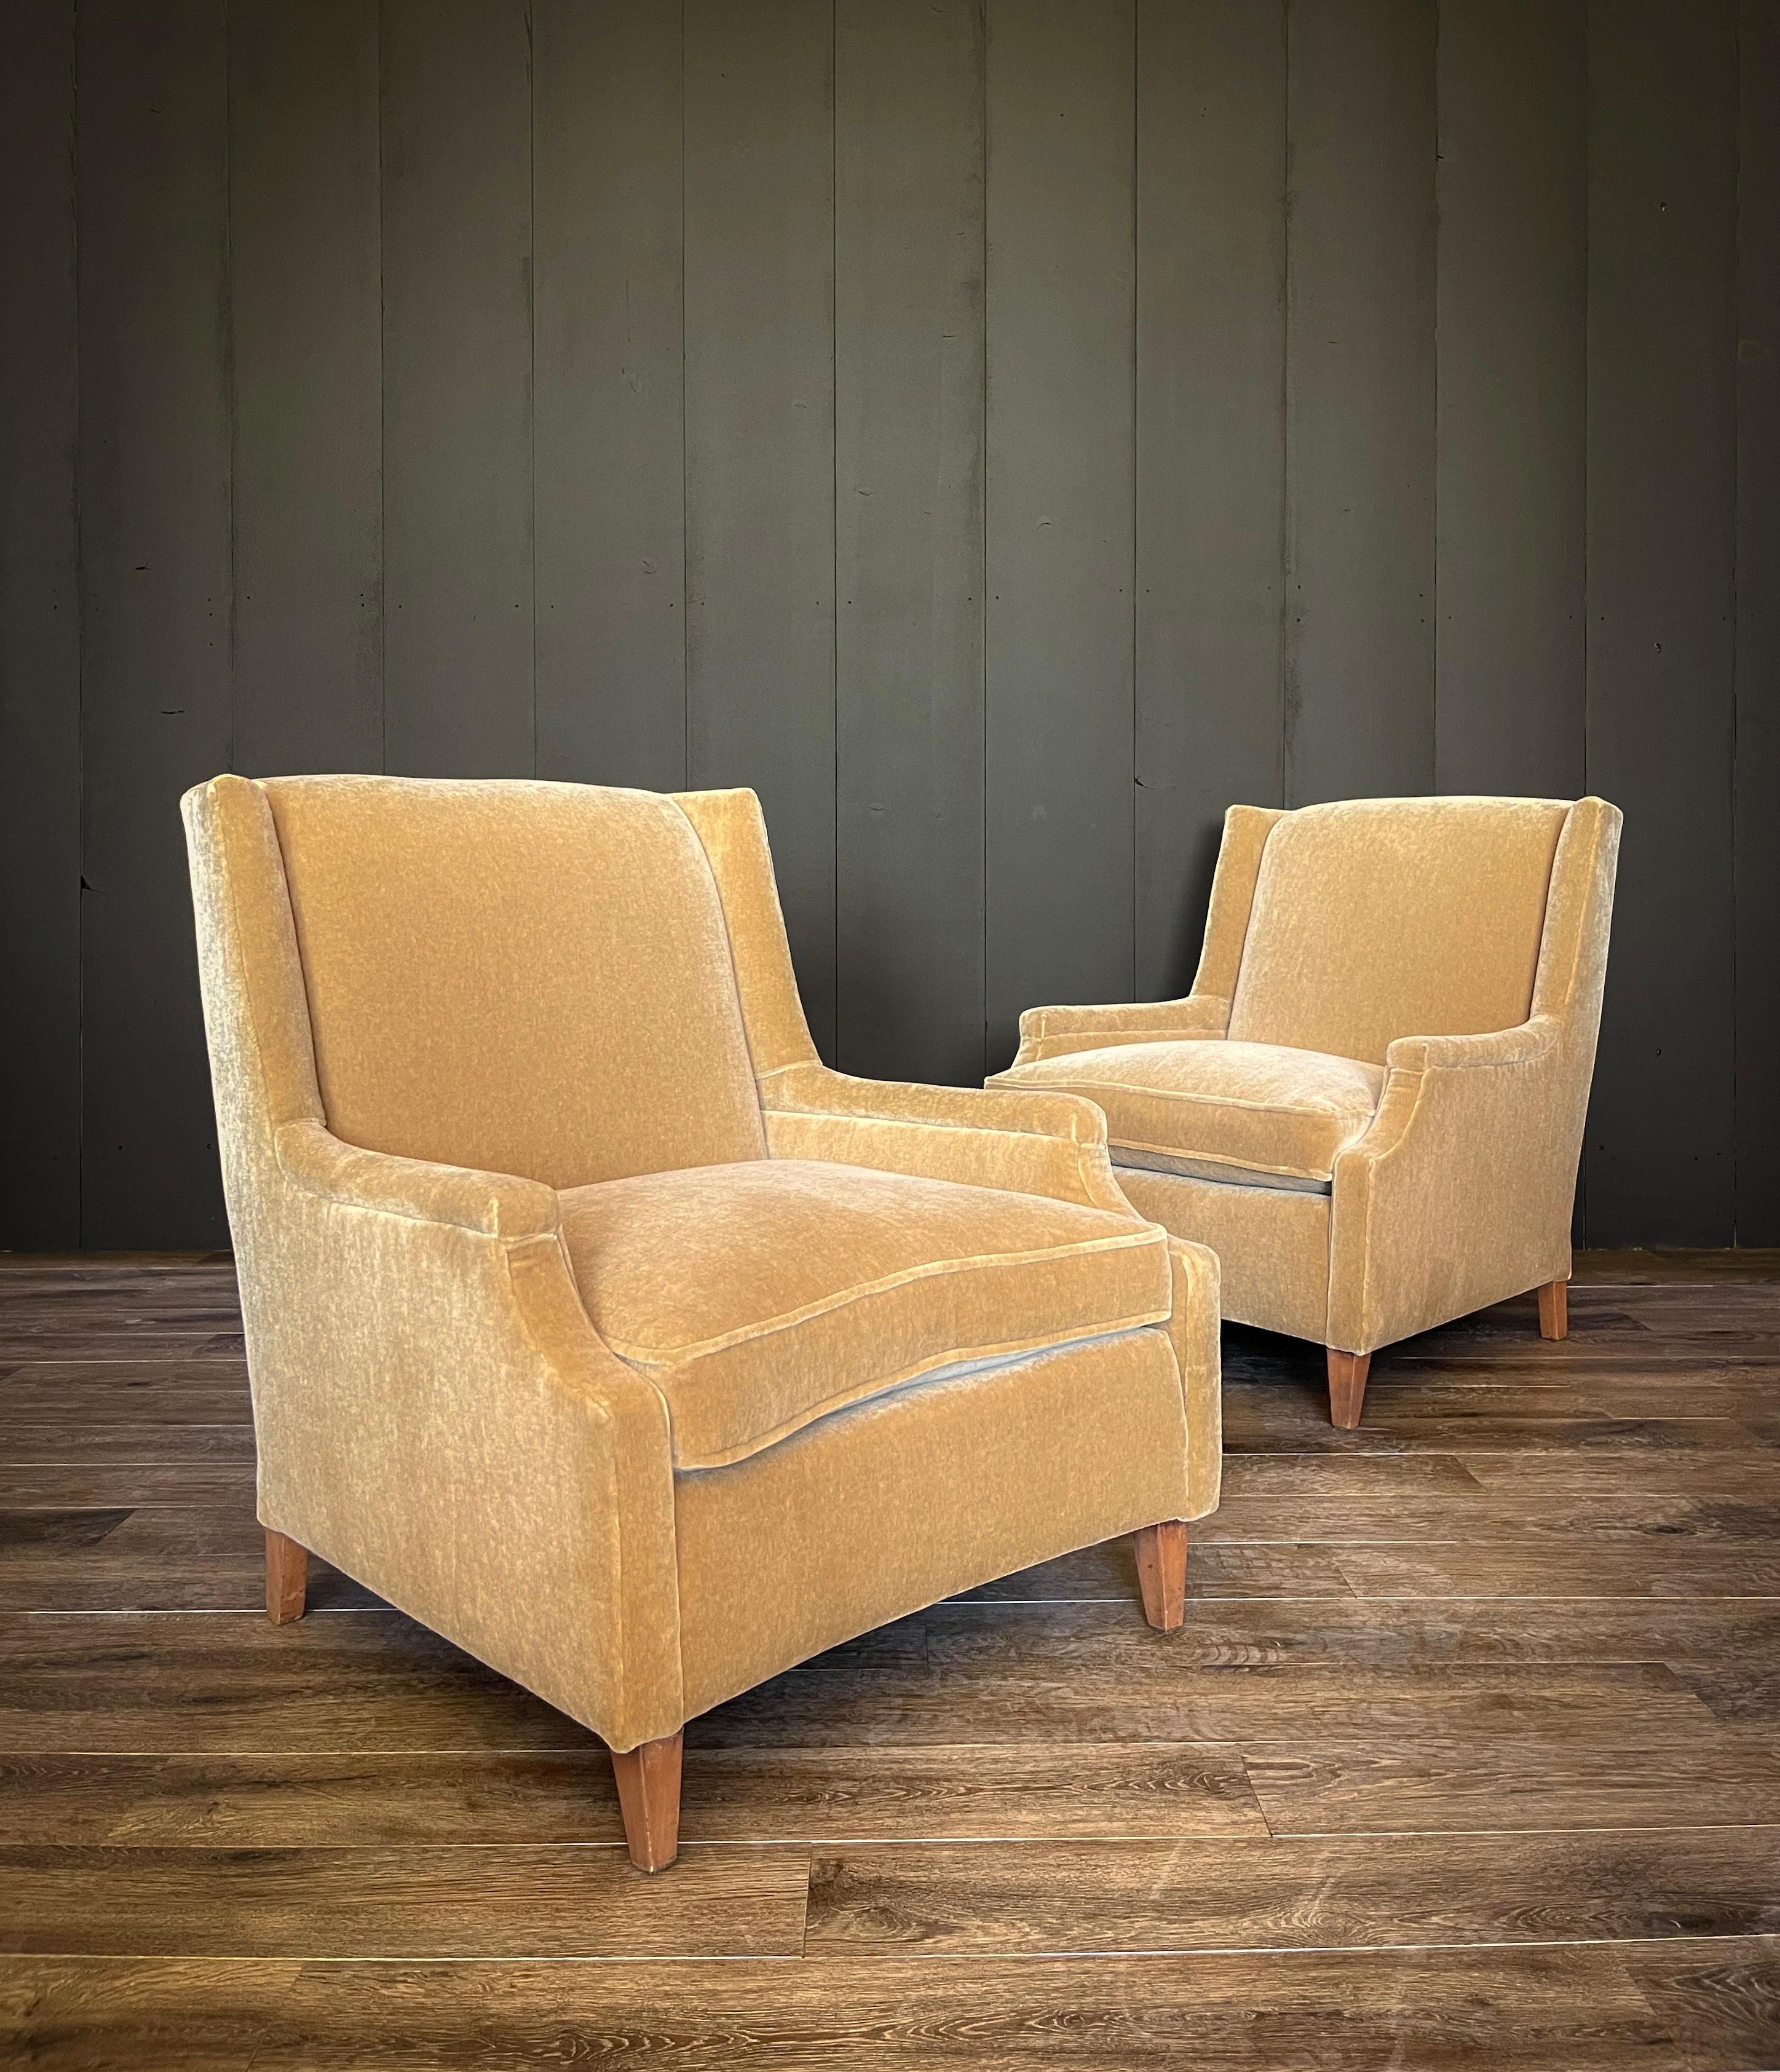 Indulge in the nostalgia of mid-century sophistication with this stunning pair of camel-colored Vintage Mohair chairs, reminiscent of the iconic 'Mad Men' era. These chairs encapsulate the essence of timeless design, embodying the sleek lines and